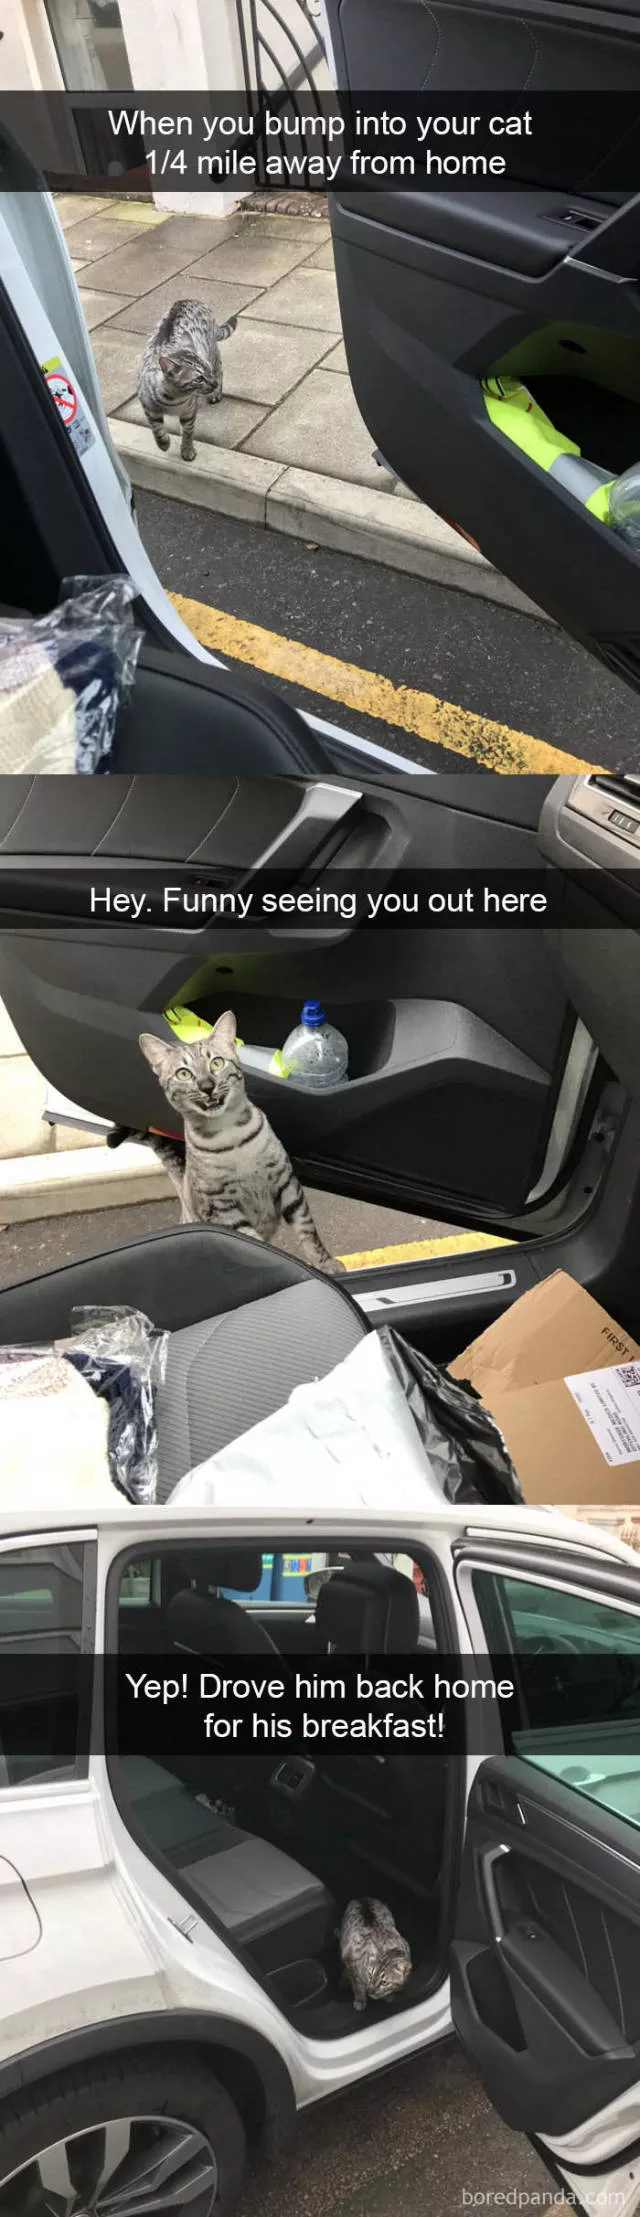 Snapchat for cats